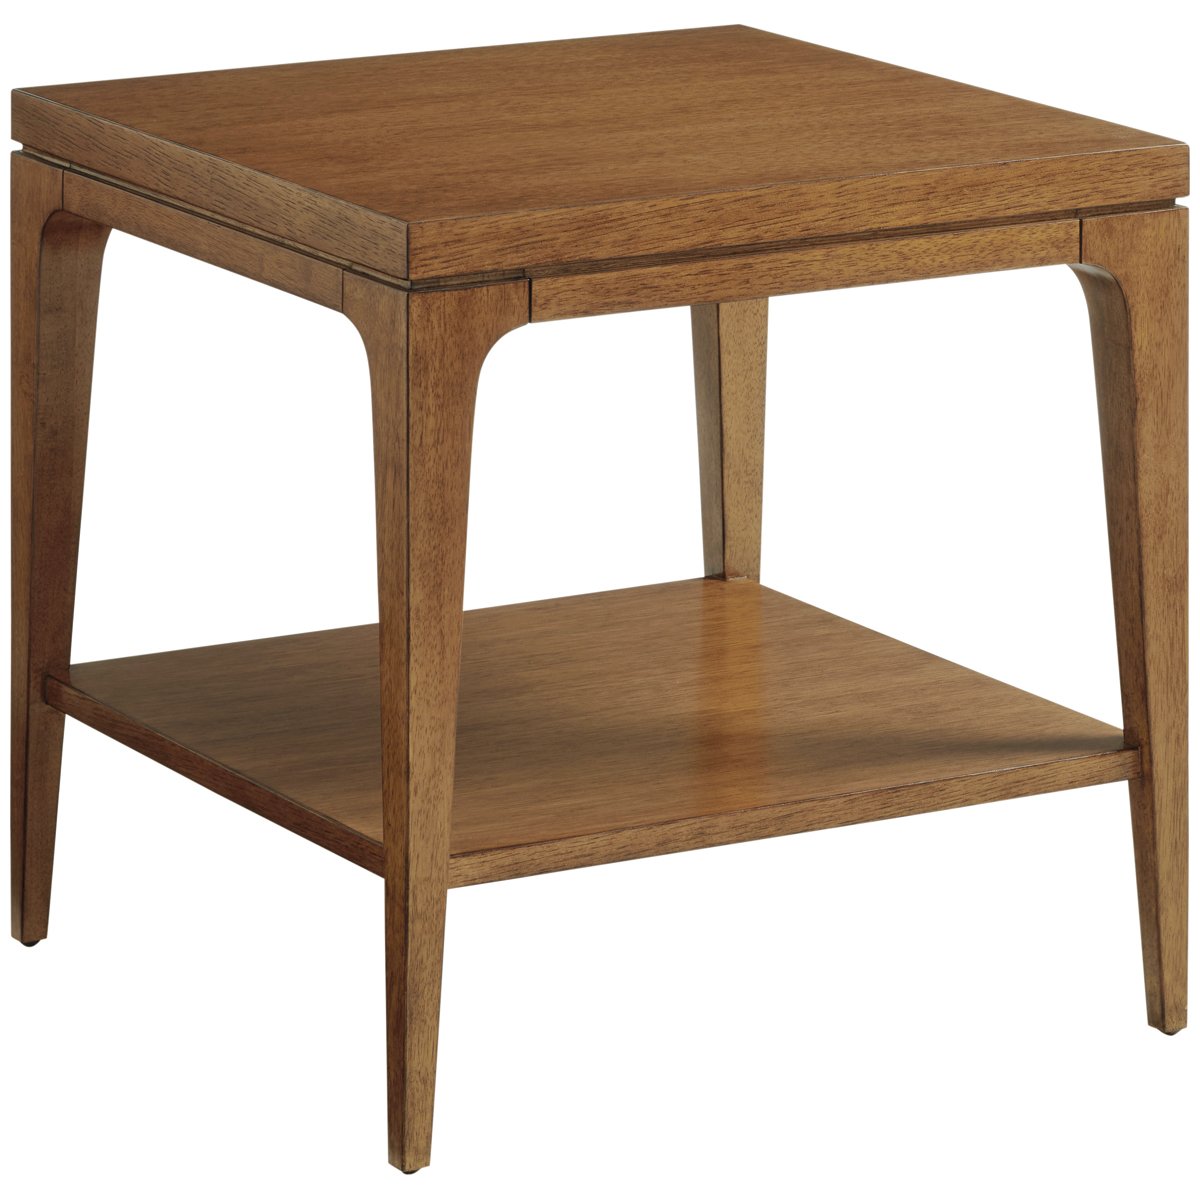 Tommy Bahama Palm Desert Kinsley Square Lamp Table